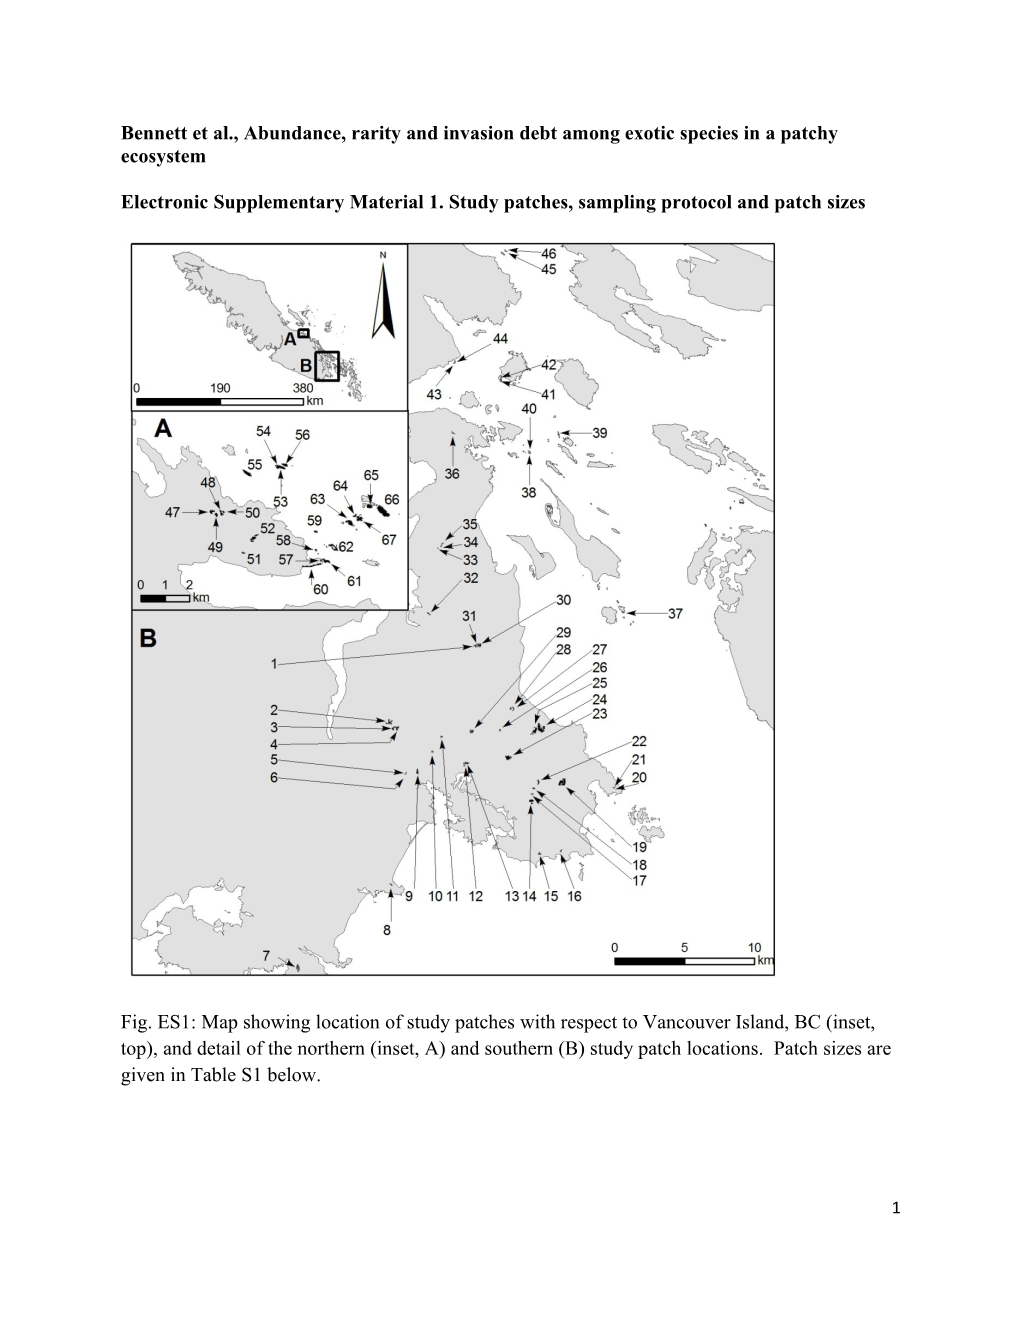 Bennett Et Al., Abundance, Rarity and Invasion Debt Among Exotic Species in a Patchy Ecosystem